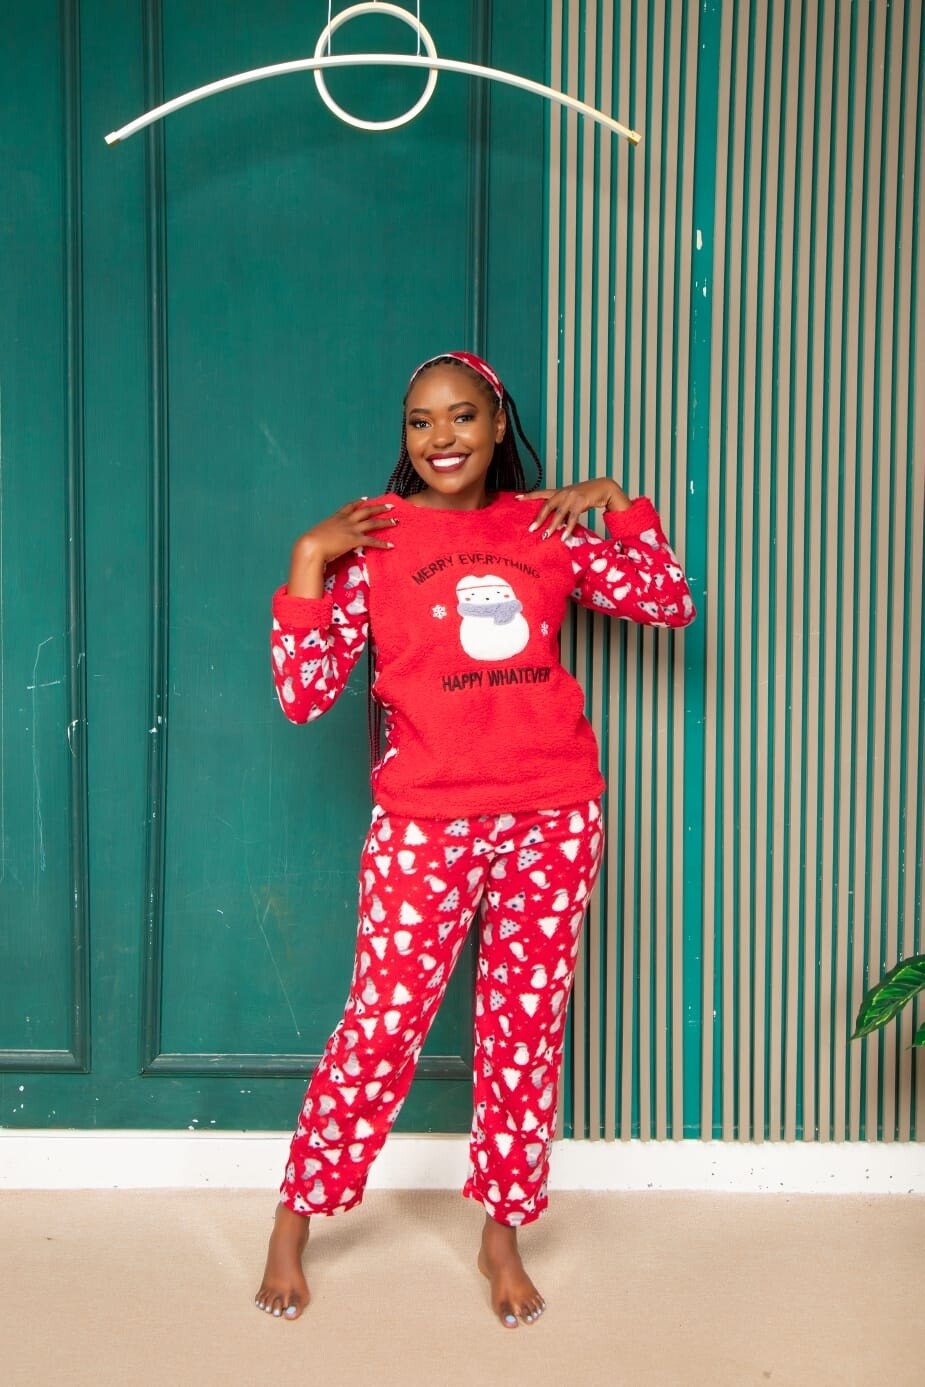 Christmas Adults pajamas 3pc set with head gear, top and trouser.
Material cotton woolen Sizes Small, medium, large, xl, 2xl, 3xl, 4xl